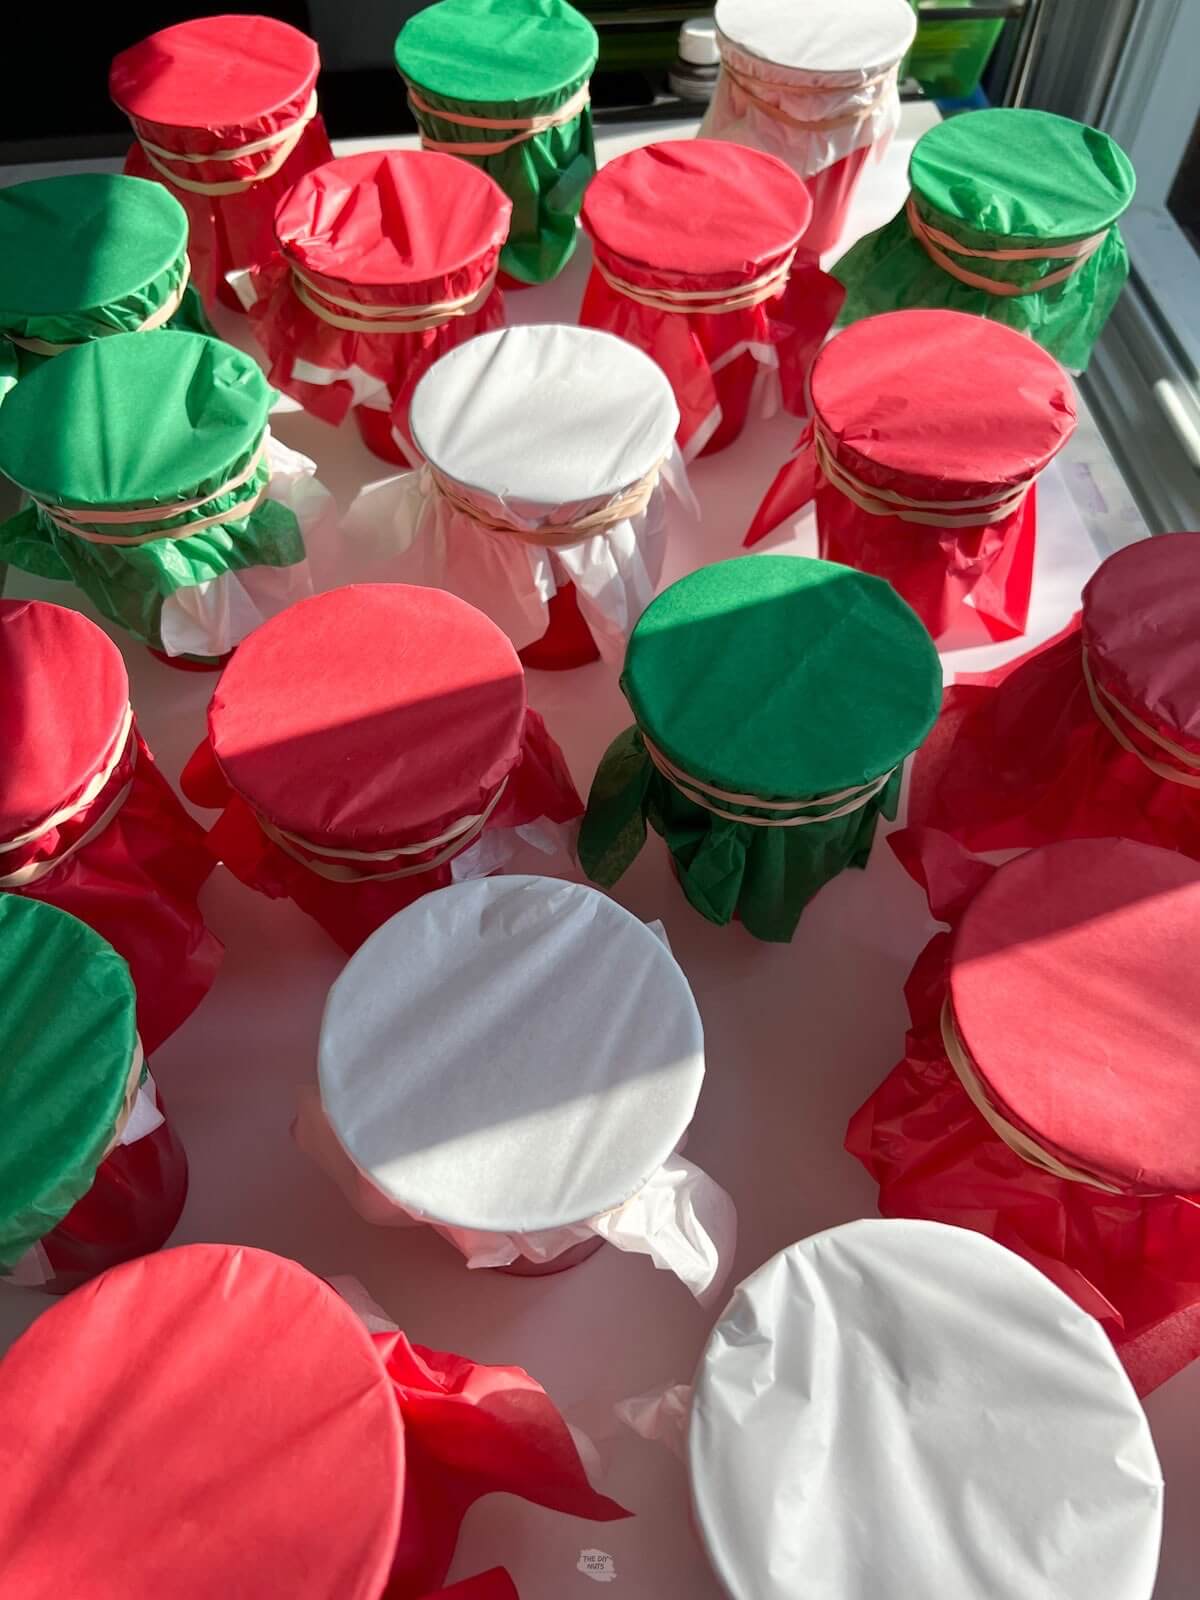 cups on table with green, red and white tissue paper on them with rubber bands.